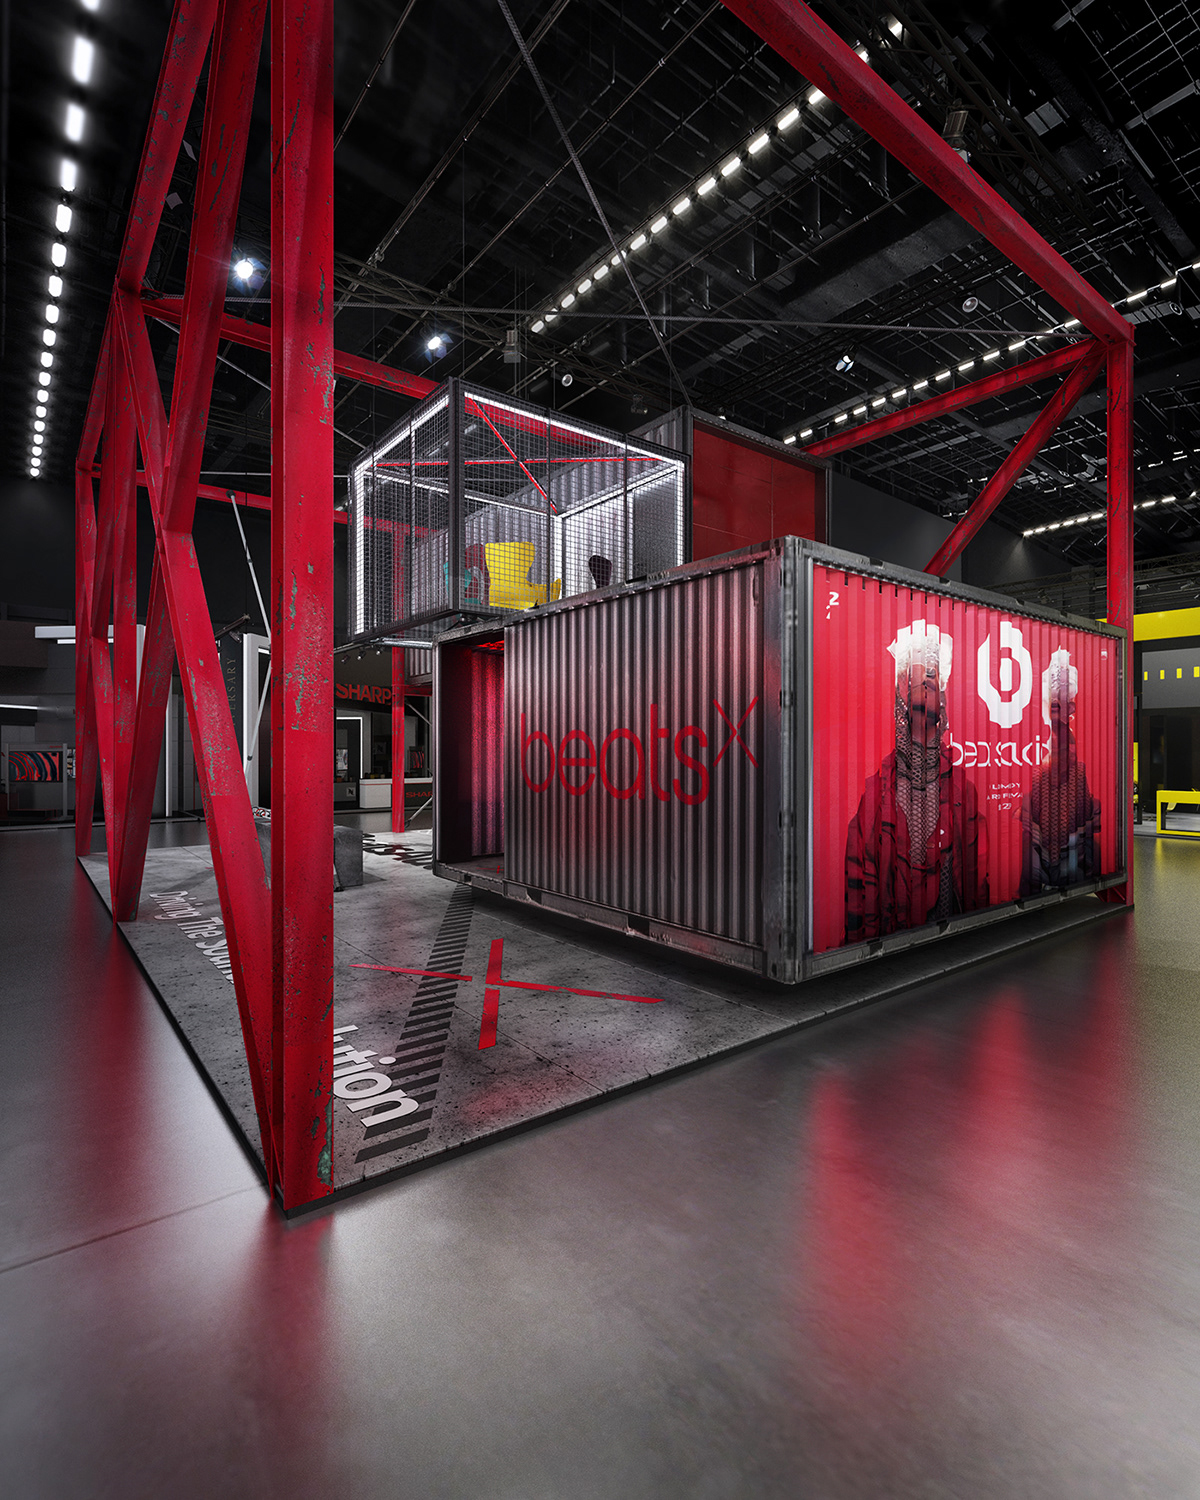 beats Beats By Dre beats x beats decade collections booth design booth Stand messestand stand design messestand design